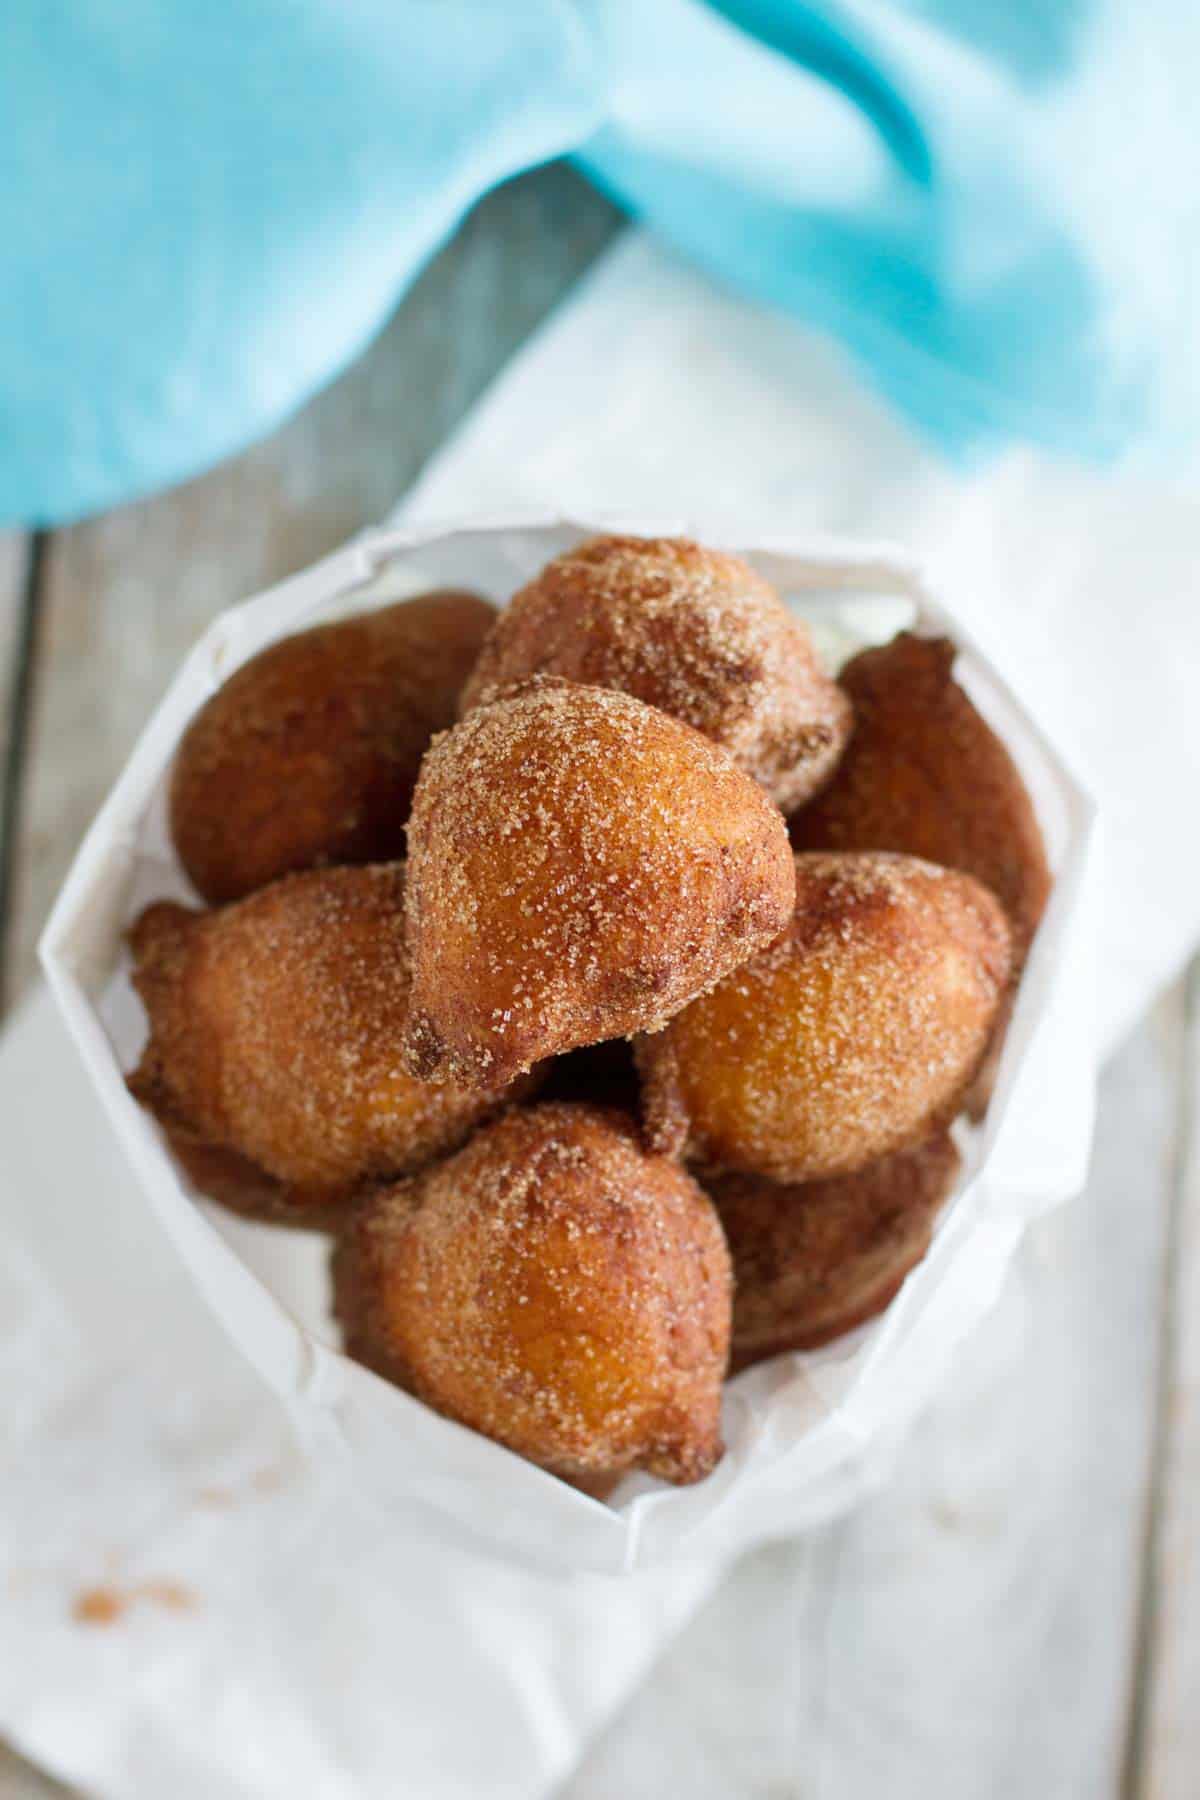 Paper bag filled with ricotta doughnuts.